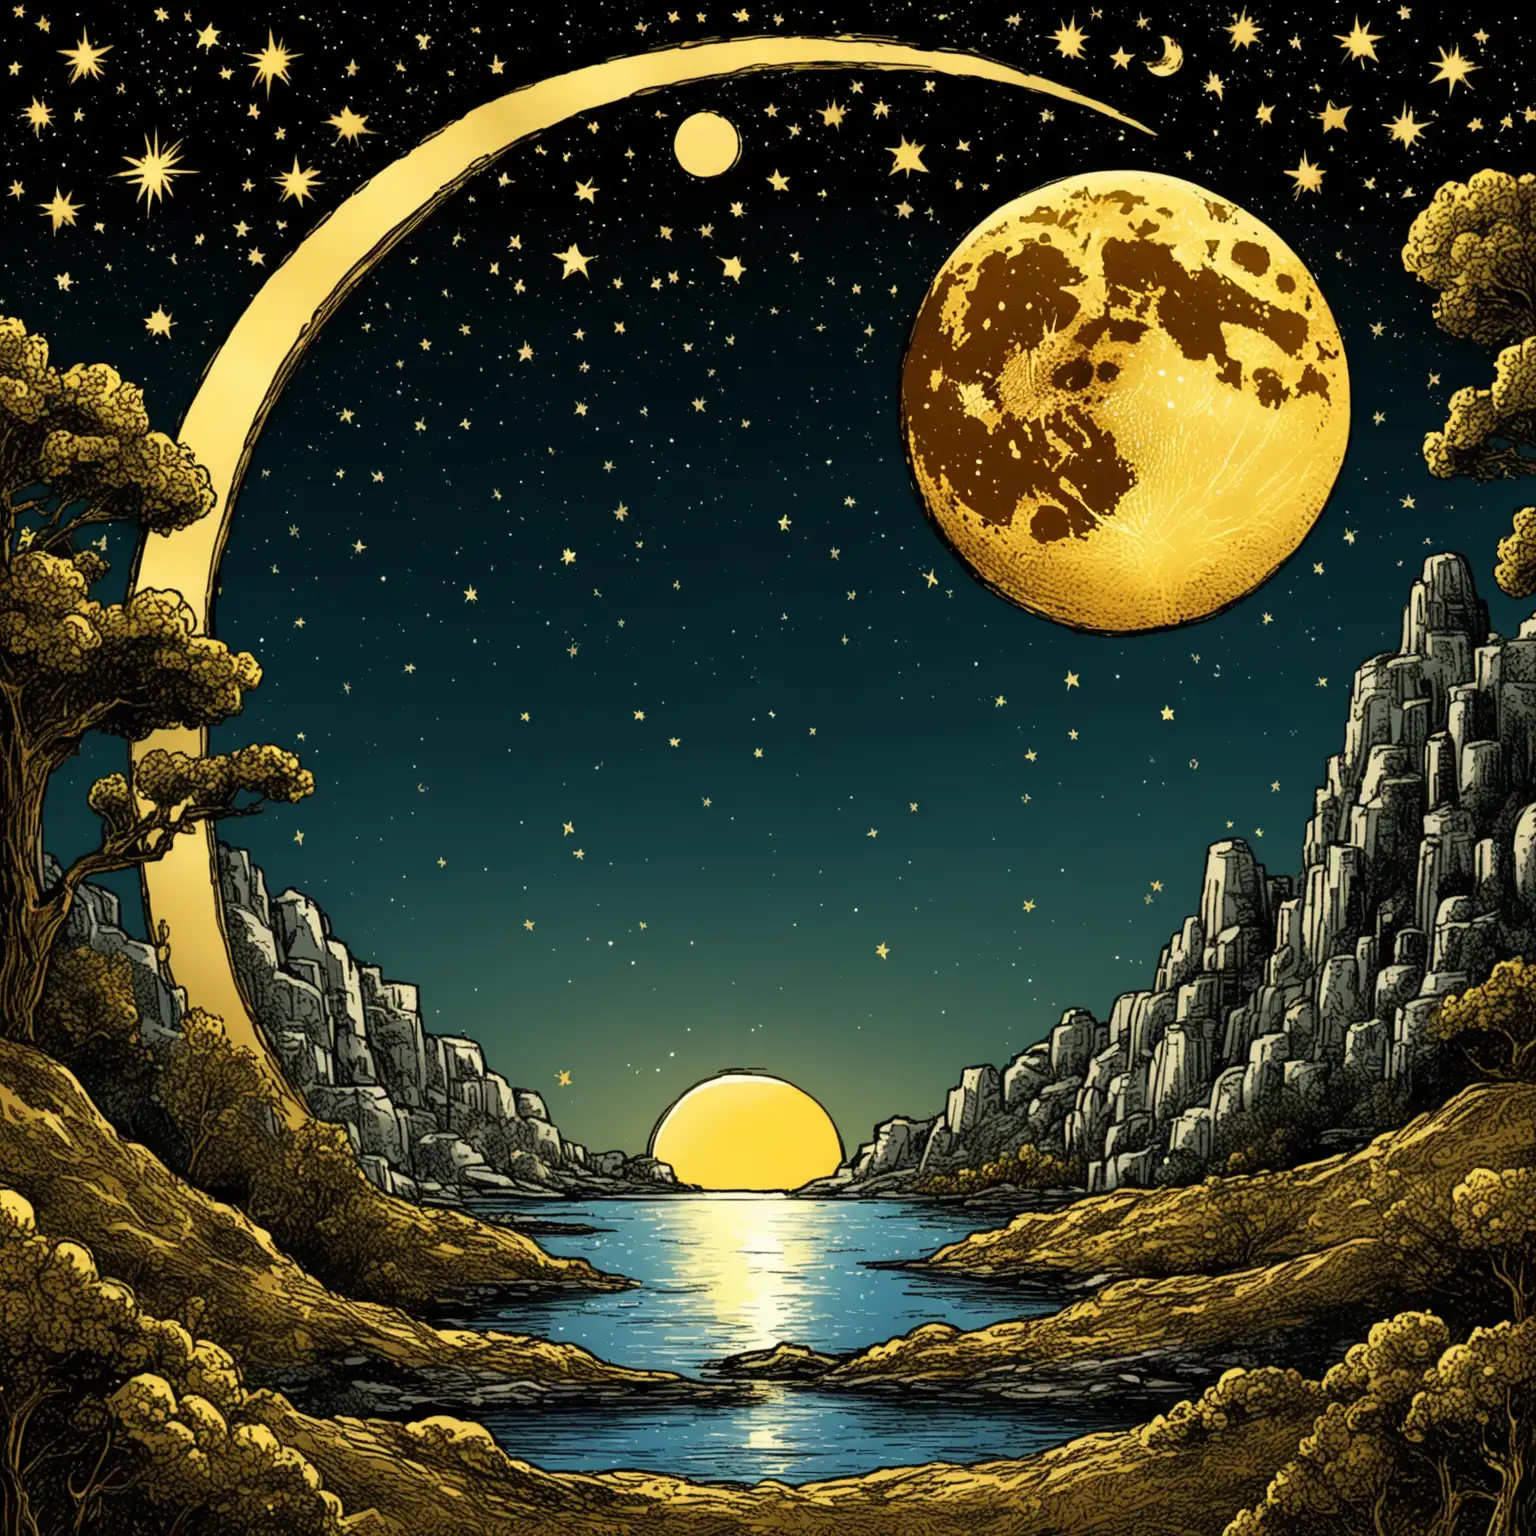 Golden-Moon-Avatar-American-Comic-Style-with-Magical-Elements